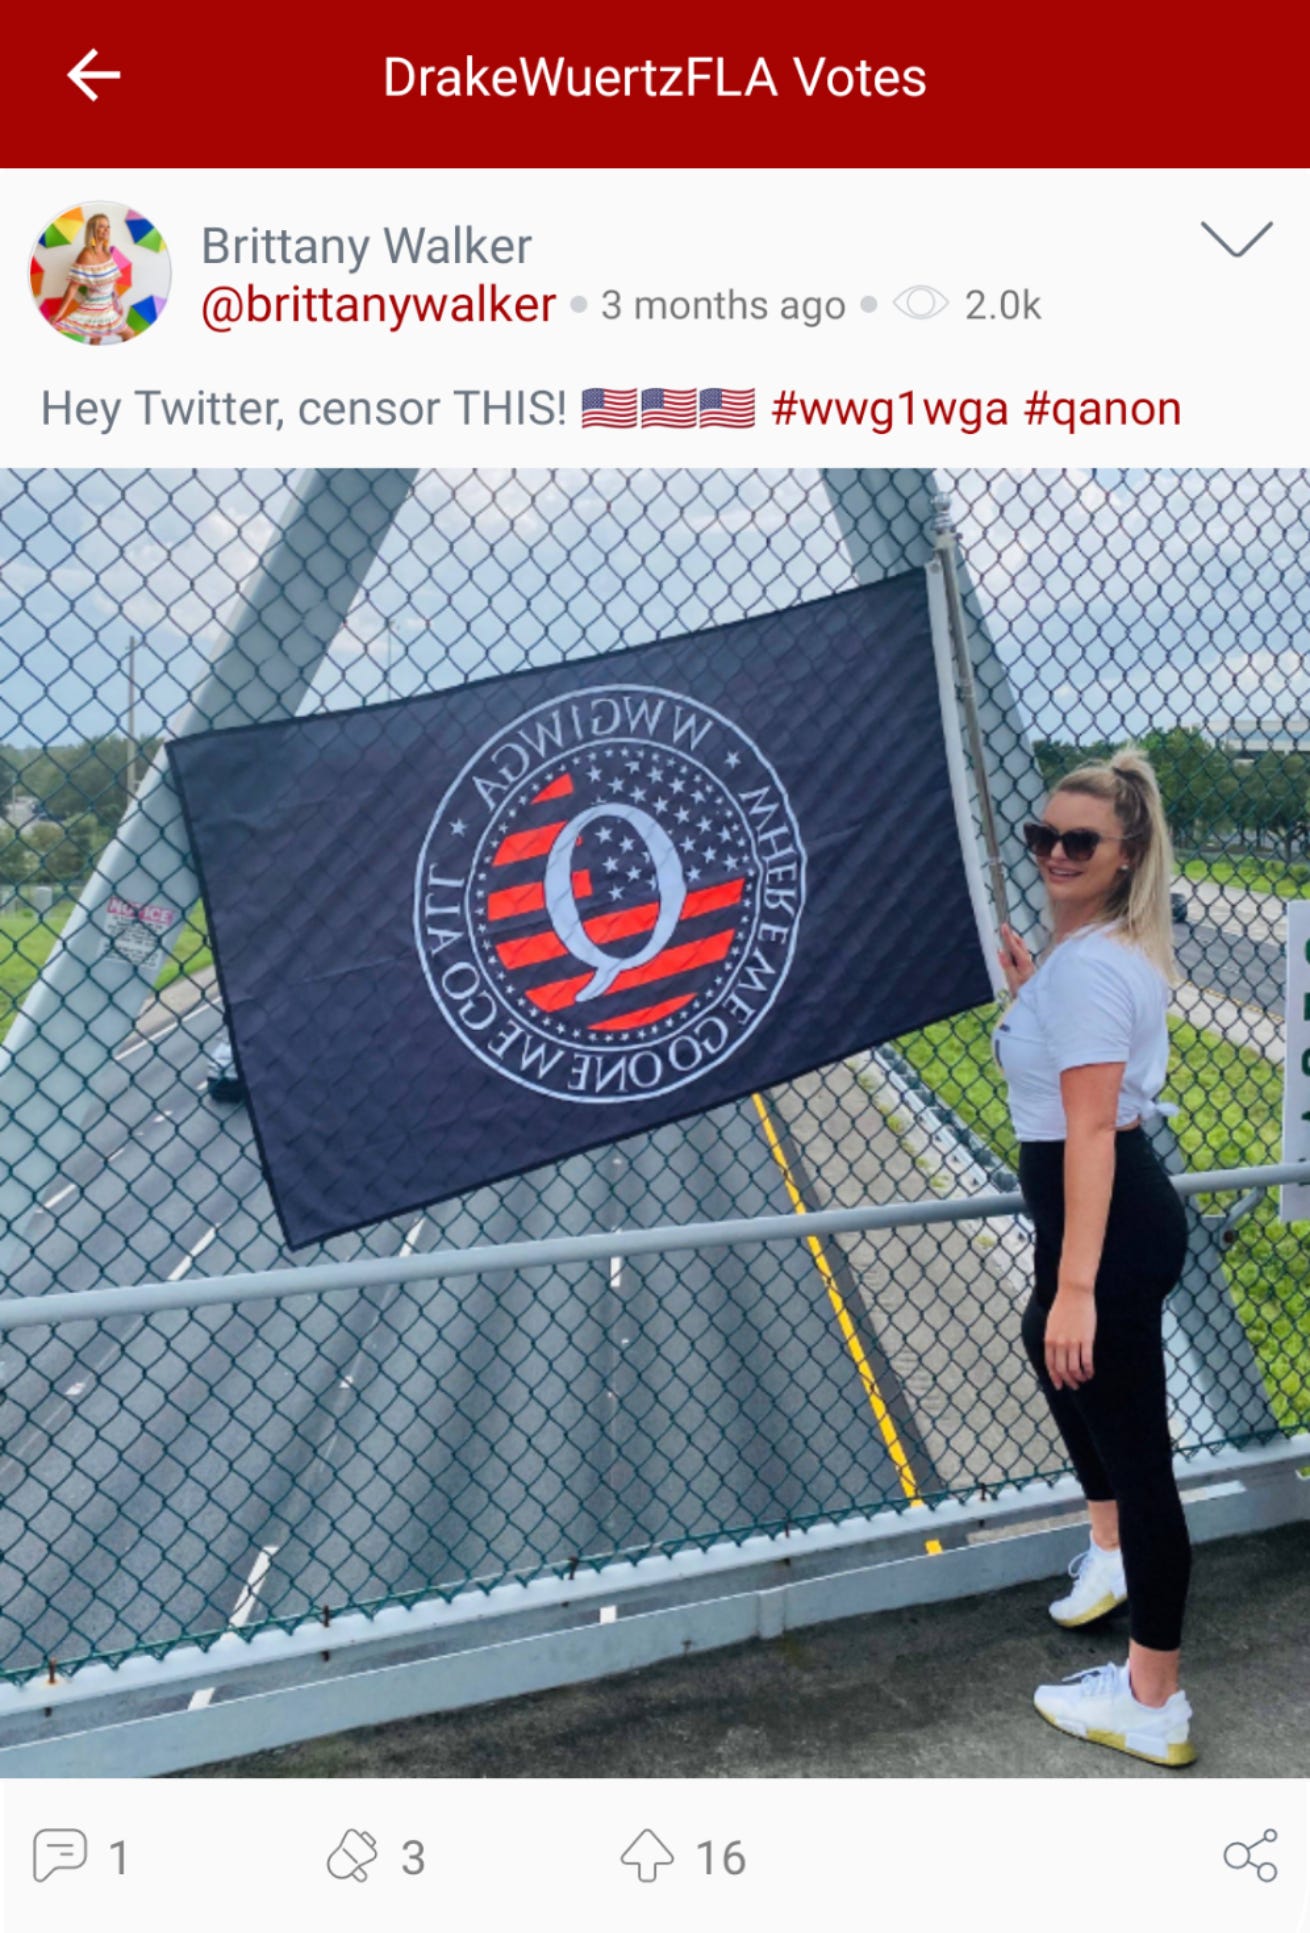 @DrakeWuertzFLA “votes” a Parler post from Brittany Walker displaying a (backwards) QAnon flag, which also includes the hashtags “#qanon” and “#wweg1wga,” the latter standing for QAnon catchphrase “Where We Go One, We Go All.” (Image: Parler screenshot.)